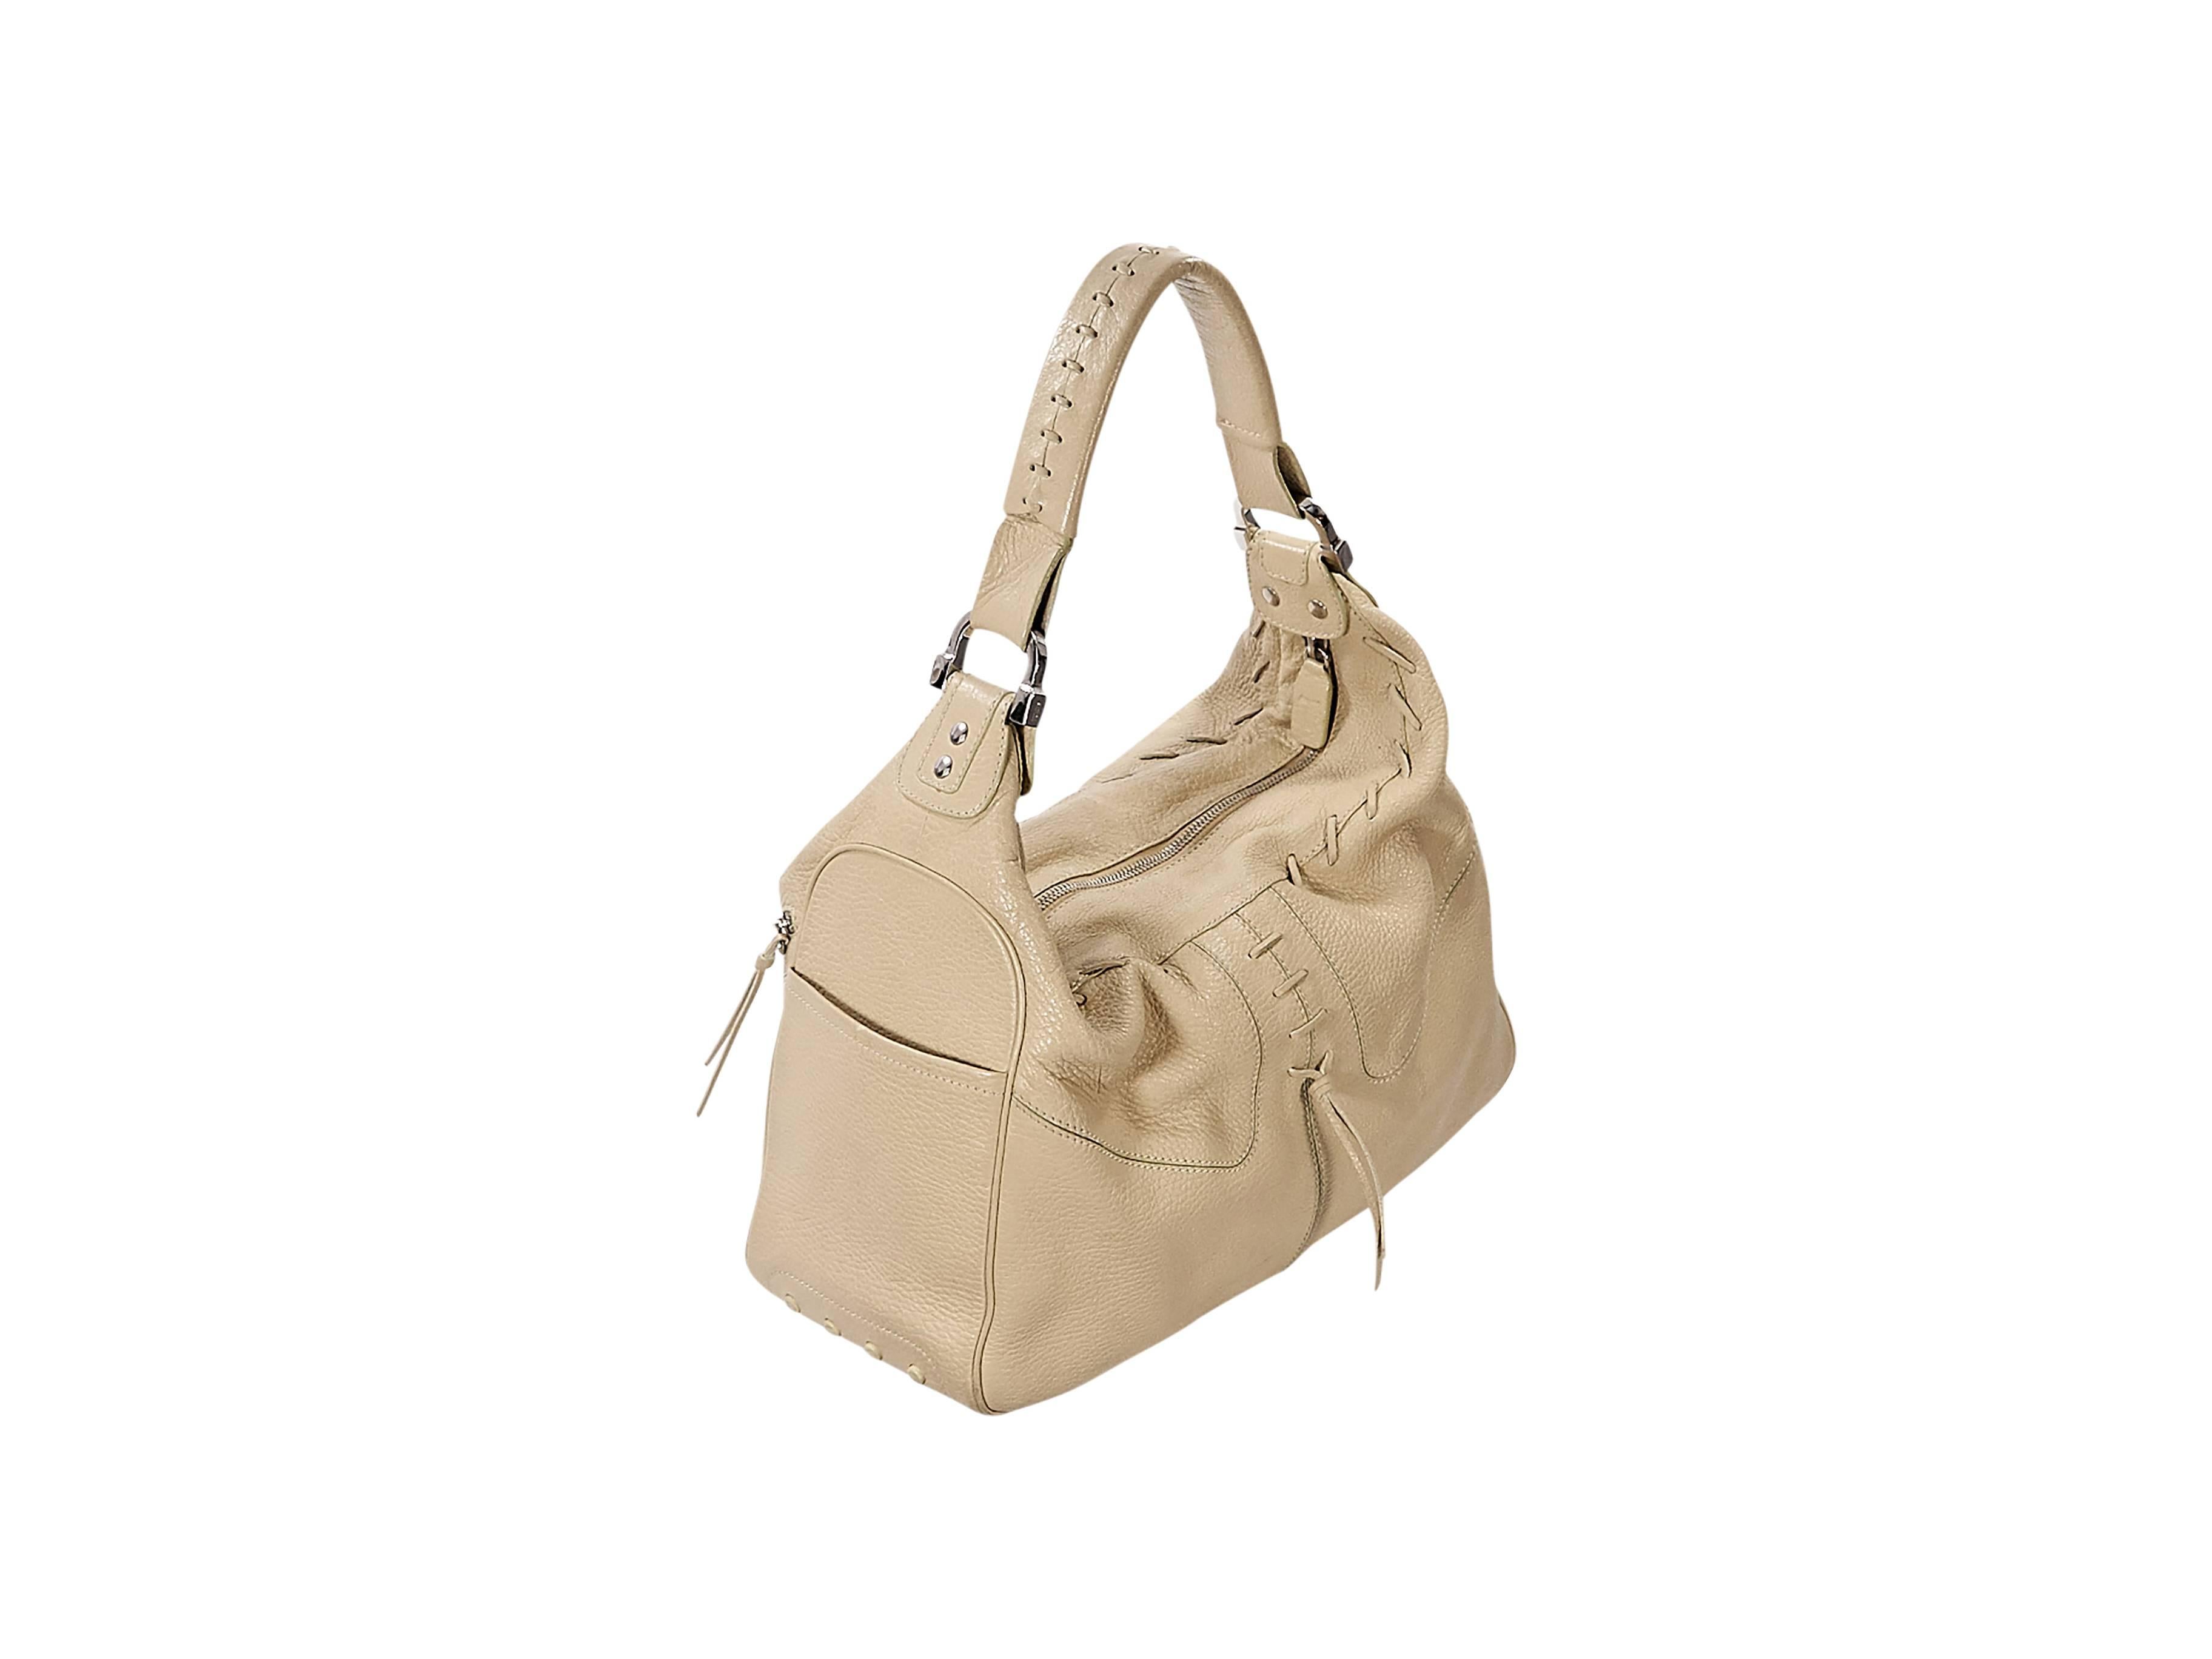 Product details:  Nude leather Milky shoulder bag by Tod's.  Accented with whipstitched trim.  Single shoulder strap.  Front exterior zip pockets.  Top zip closure.  Lined interior with inner zip pocket.  Side exterior slide pockets.  Silvertone